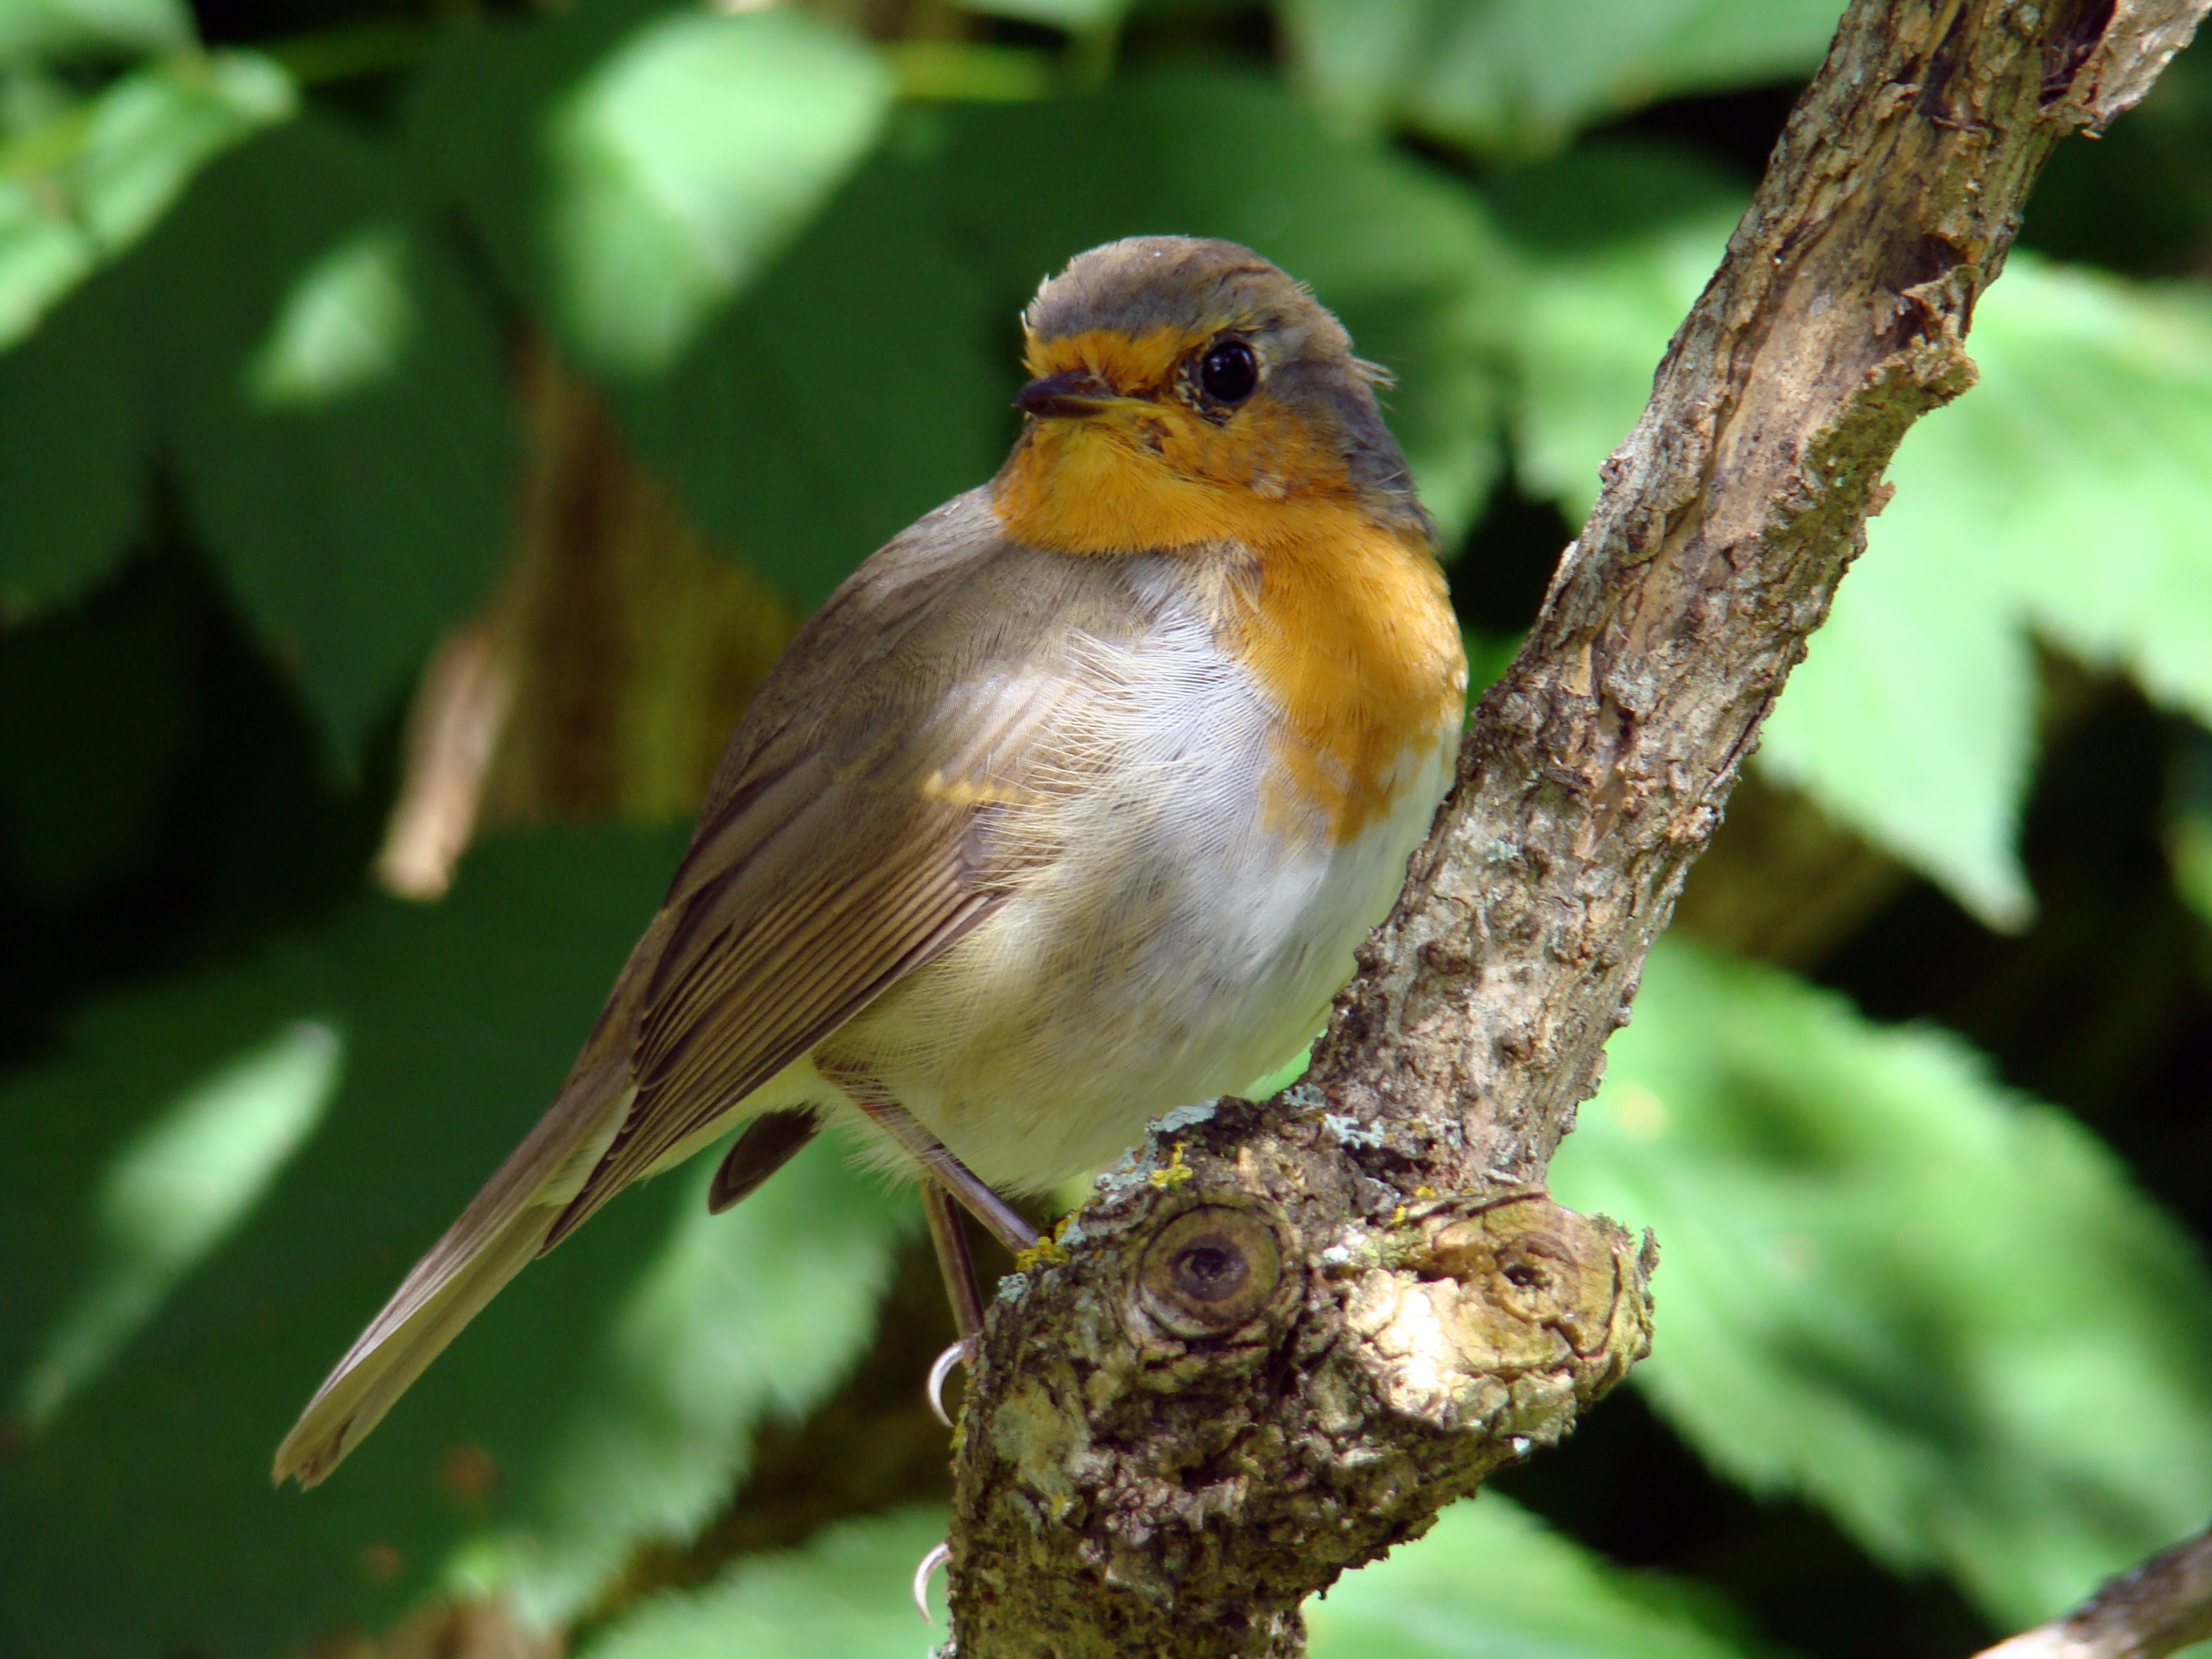 brown, yellow, and white feathered bird standing on tree branch